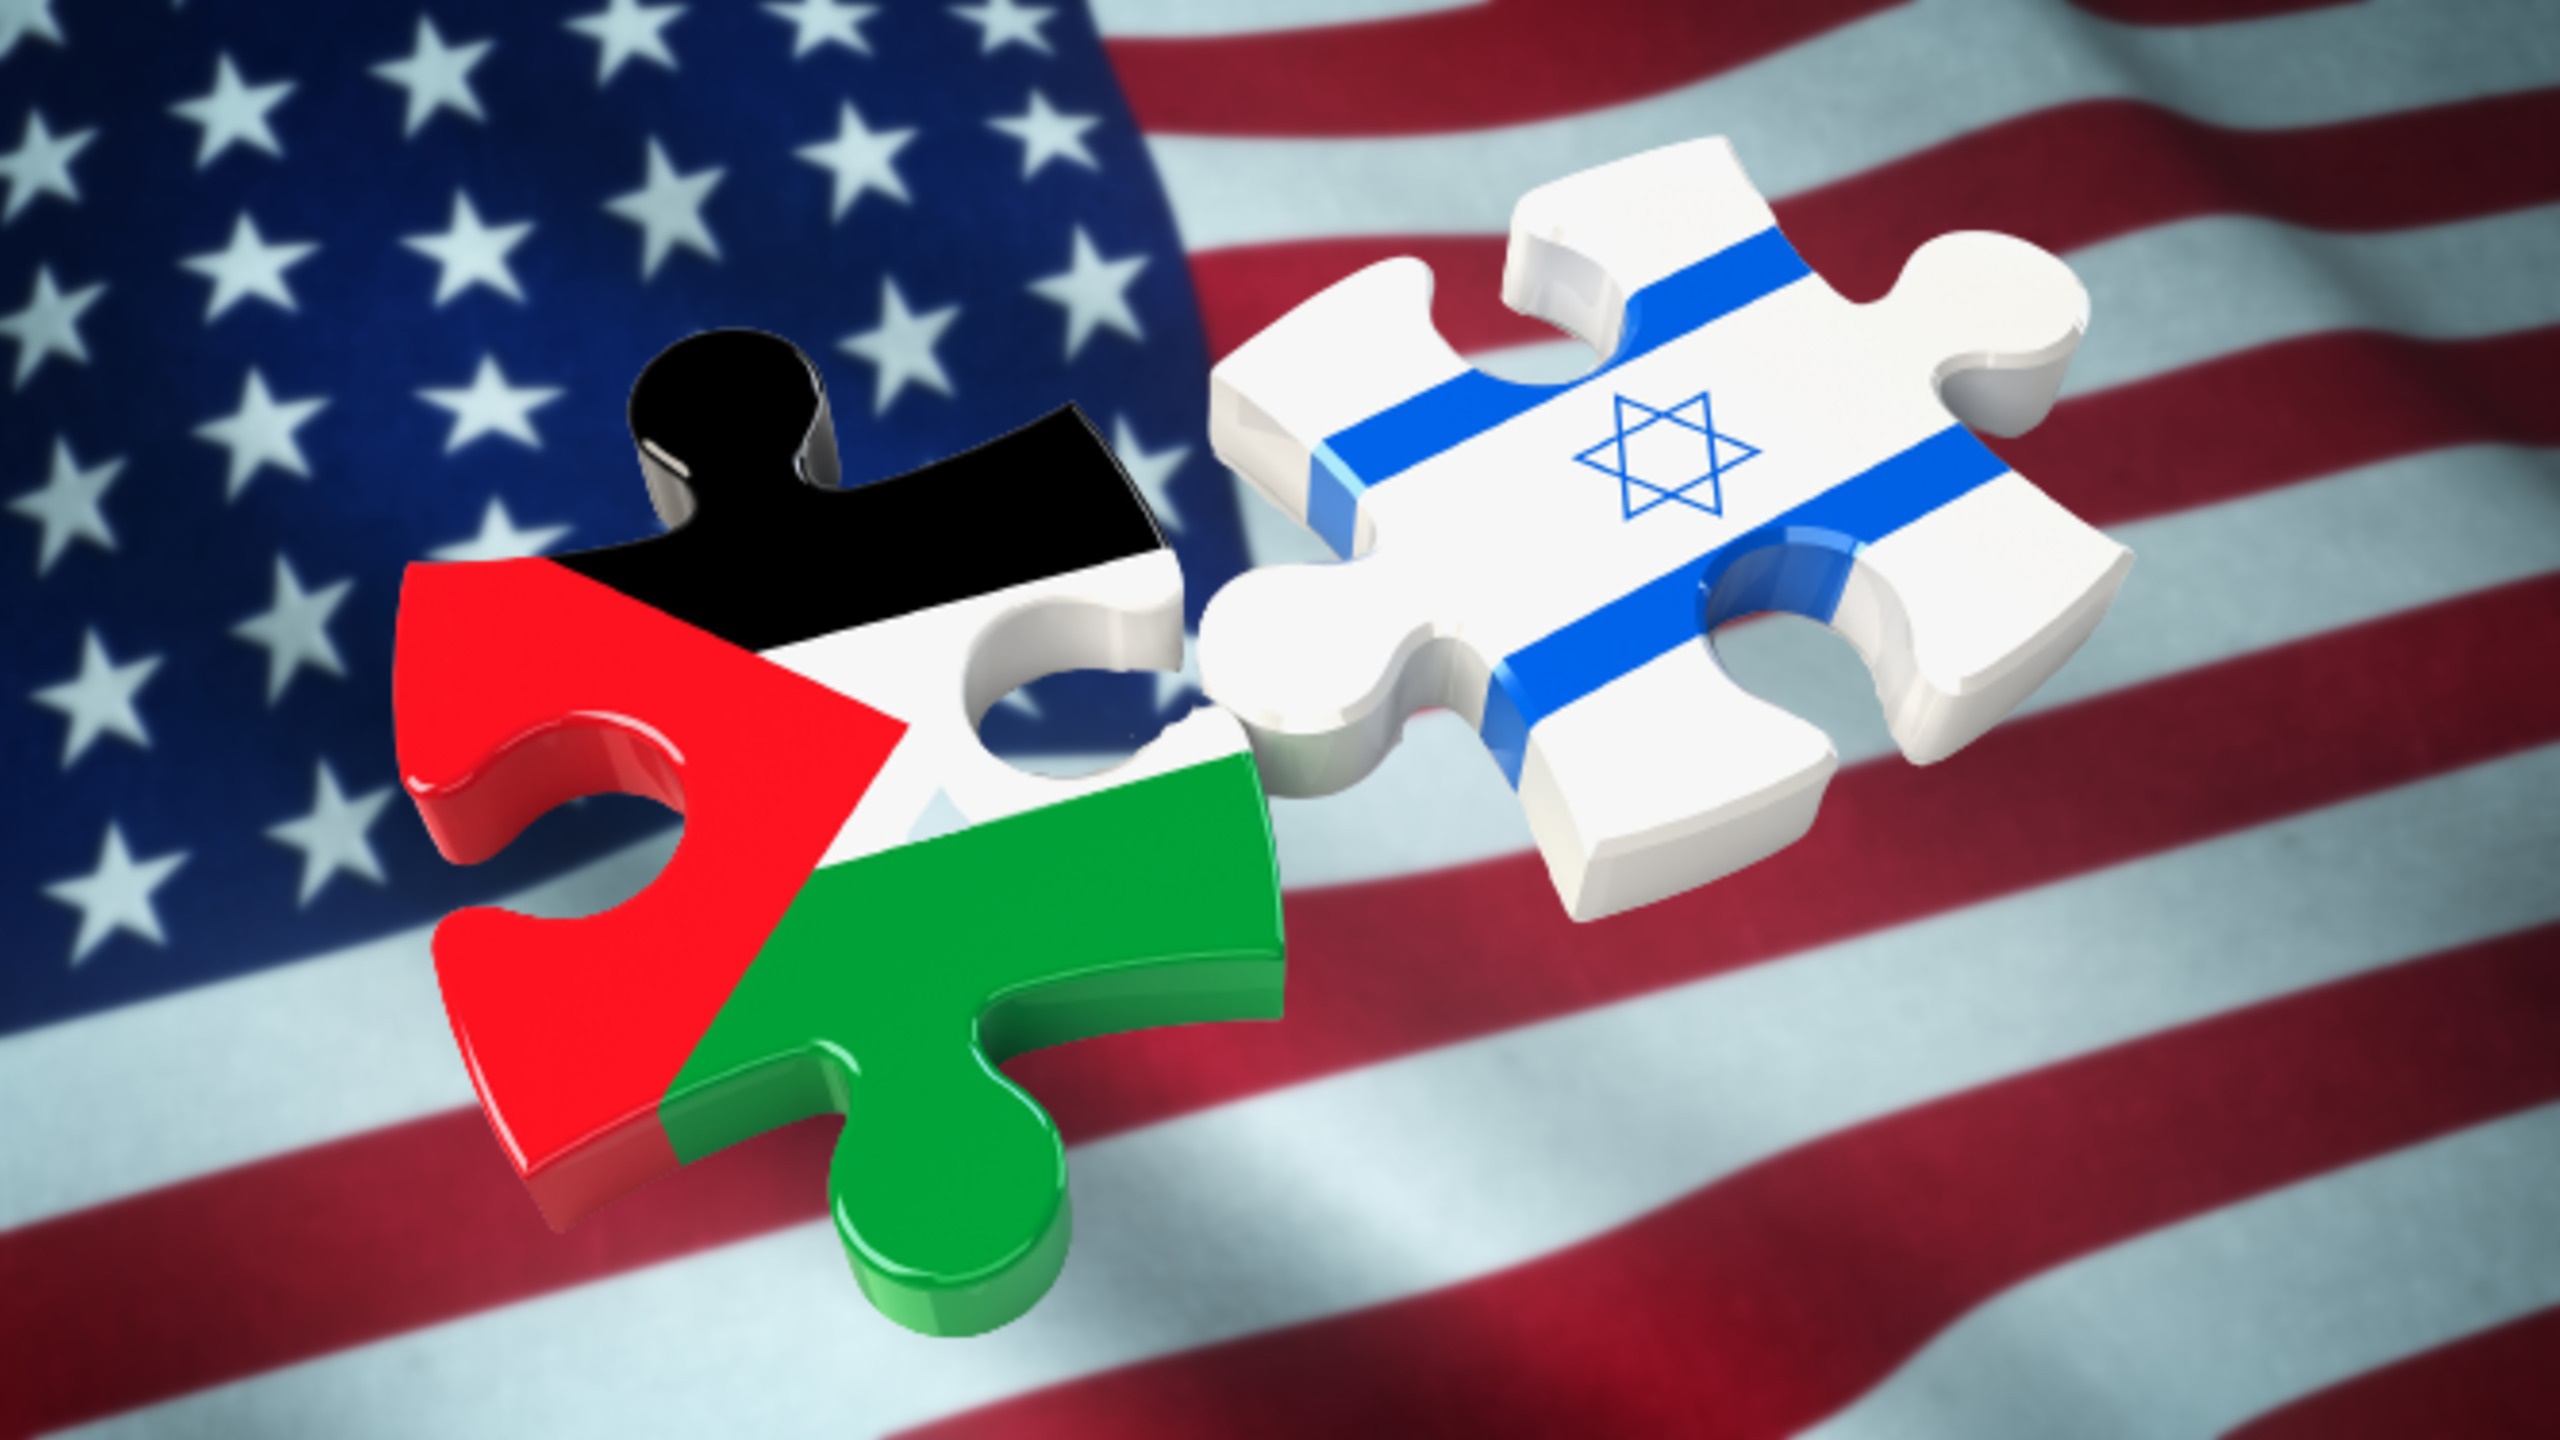 2-State Solution Act Places Israeli-Palestinian Conflict Front and Center in US Politics